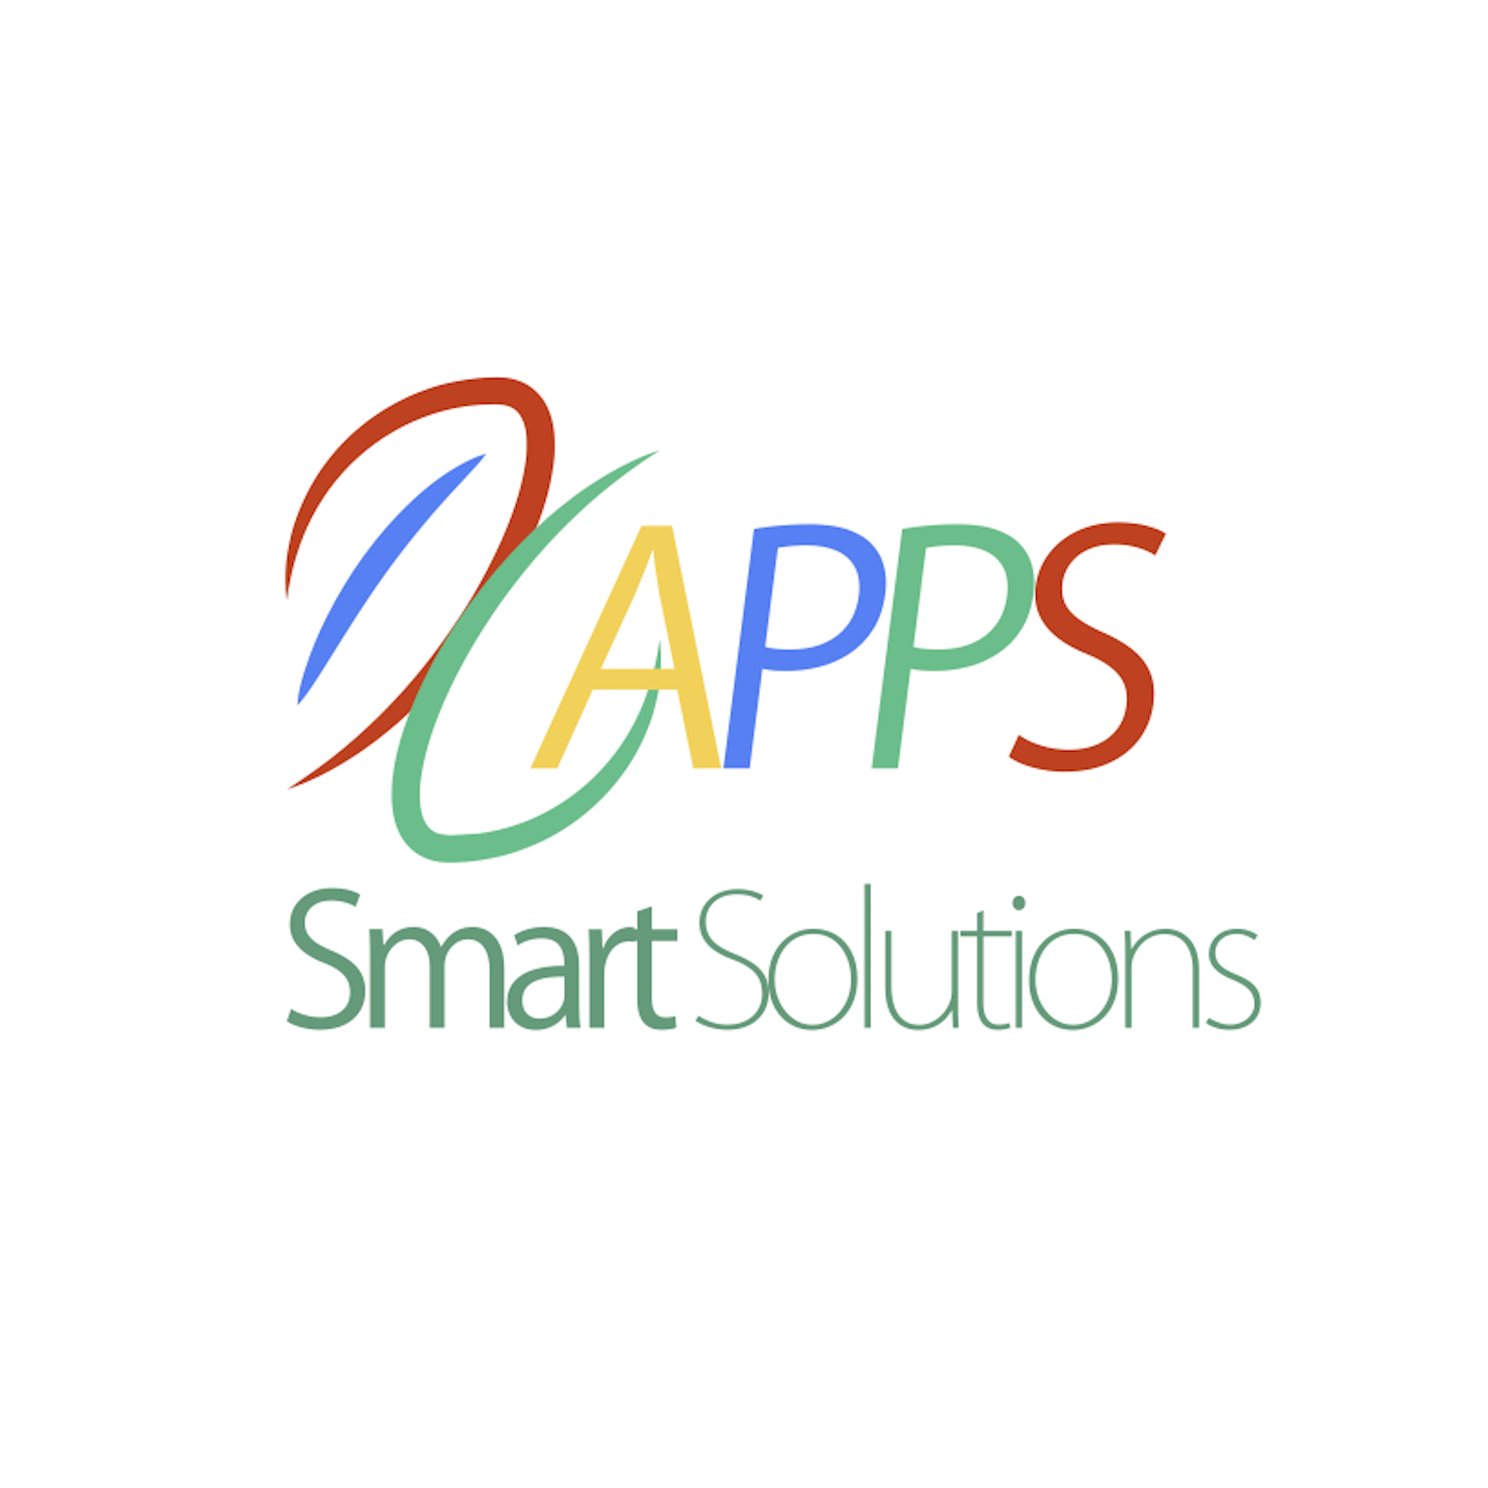 X Apps Solutions profile on Qualified.One